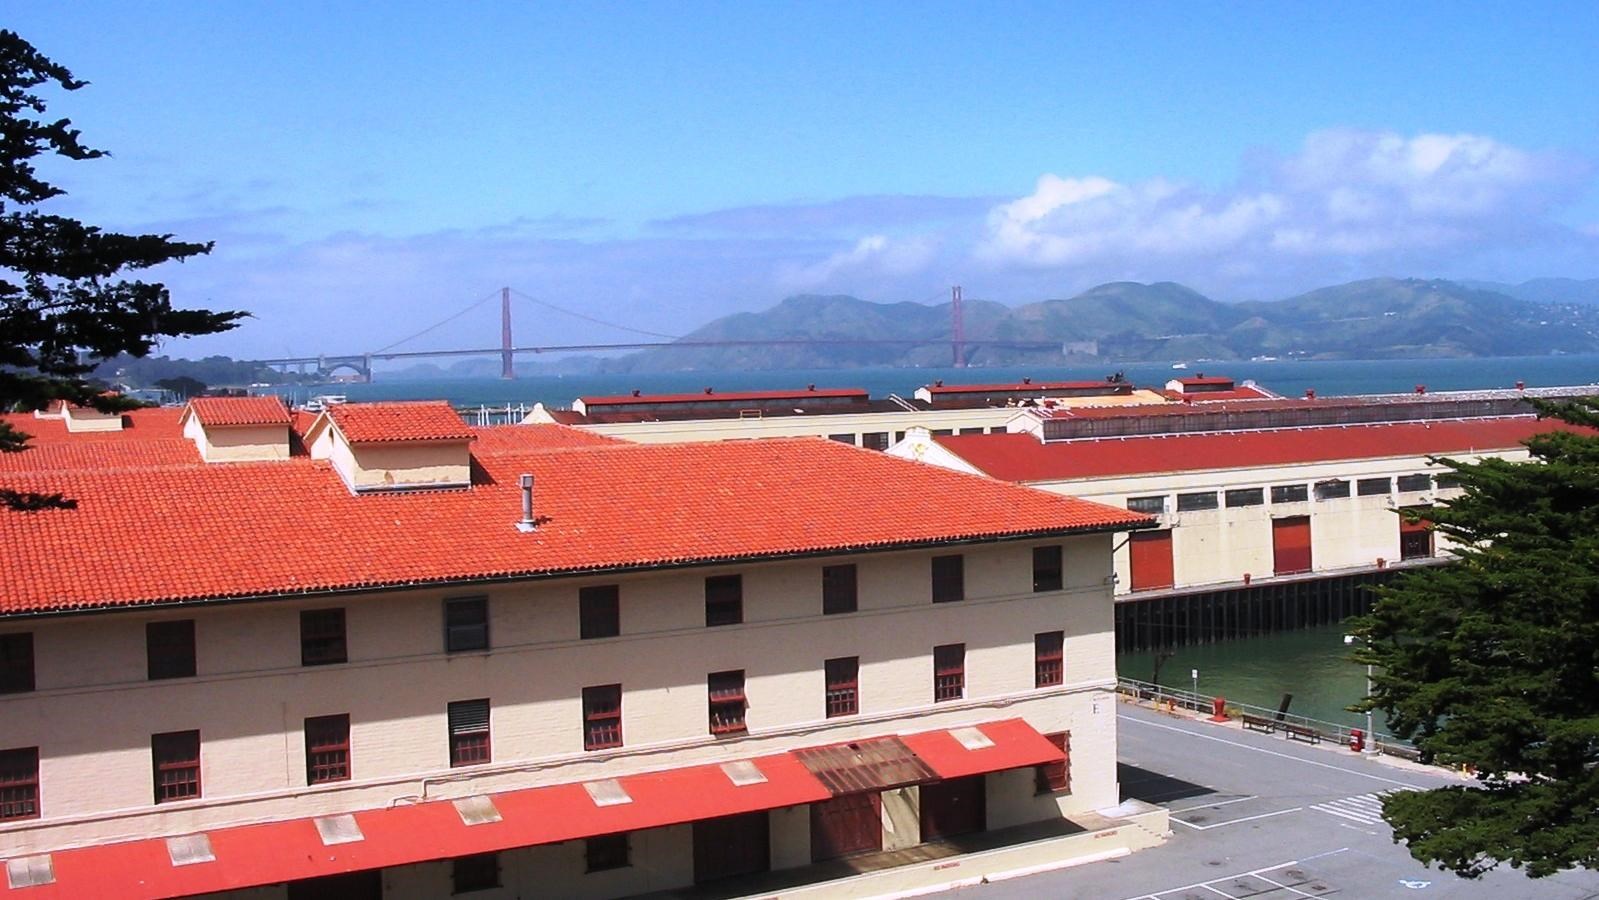 Warehouse in foreground with view of San Francisco Bay in background. 